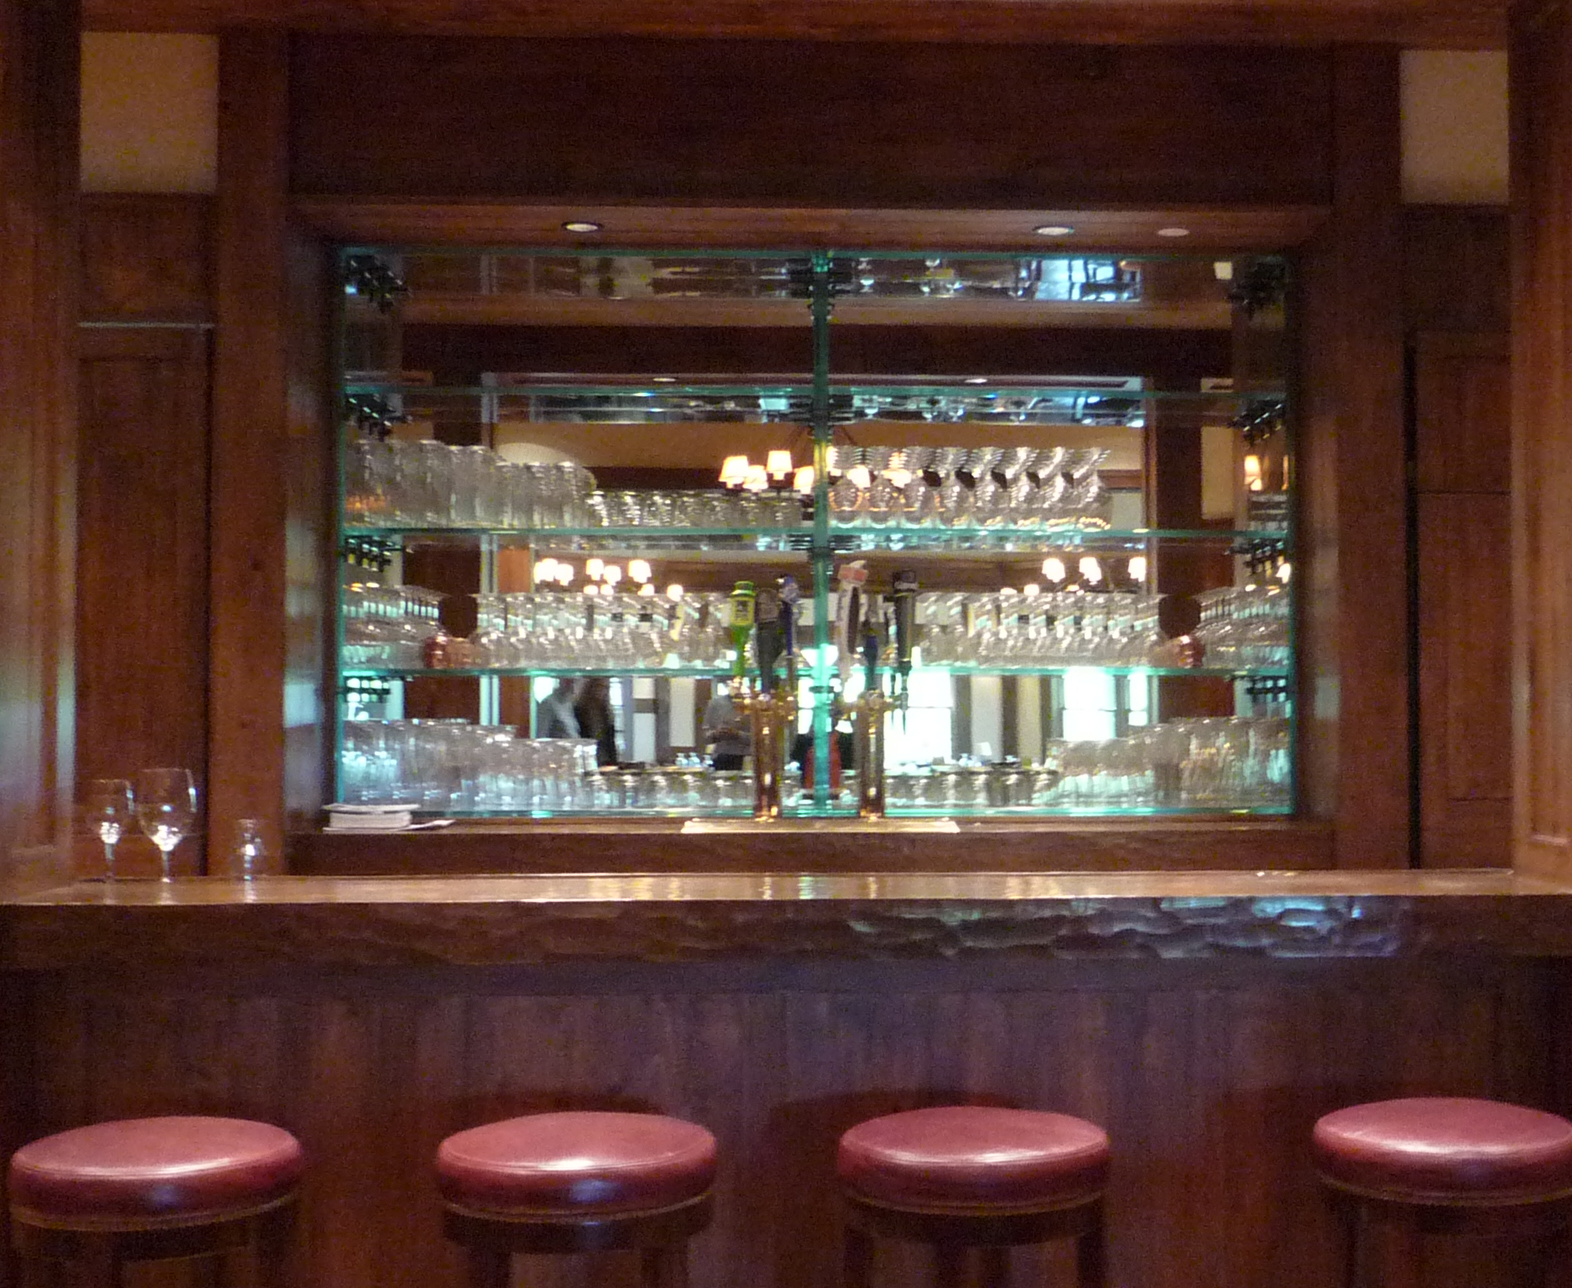  New Rear Glass Shelving and Mirrored Back Bar 